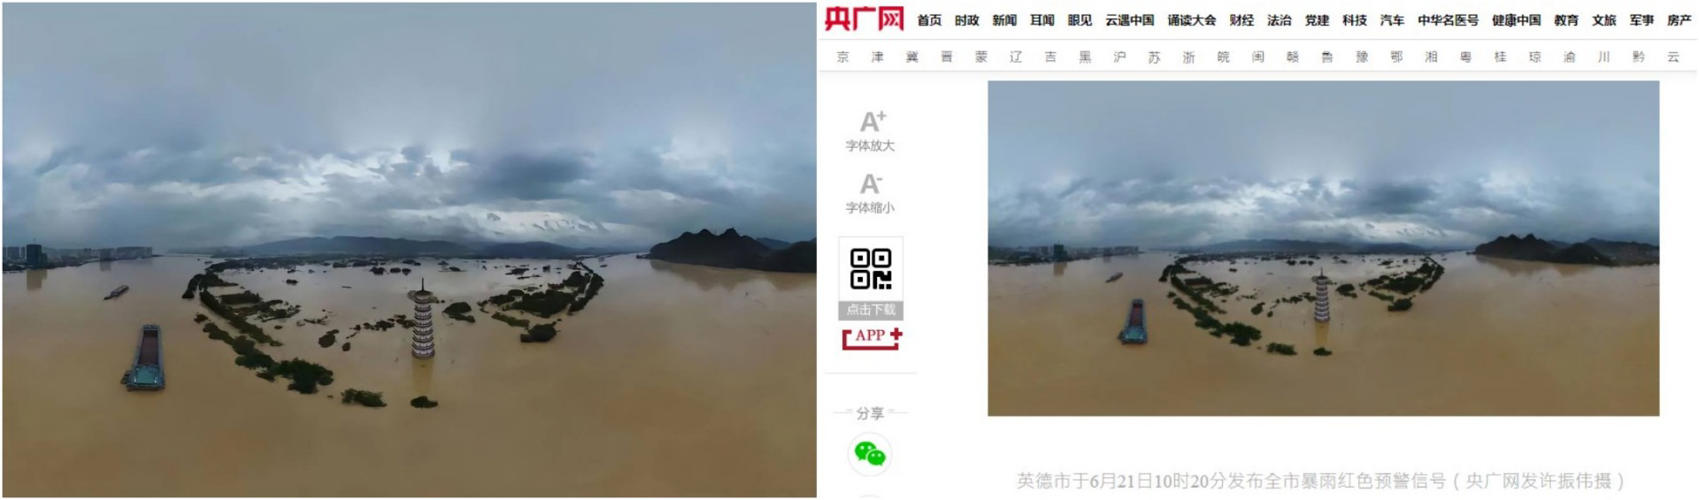 Photos of 2022 southern China floods passed off online as 2024 deluge